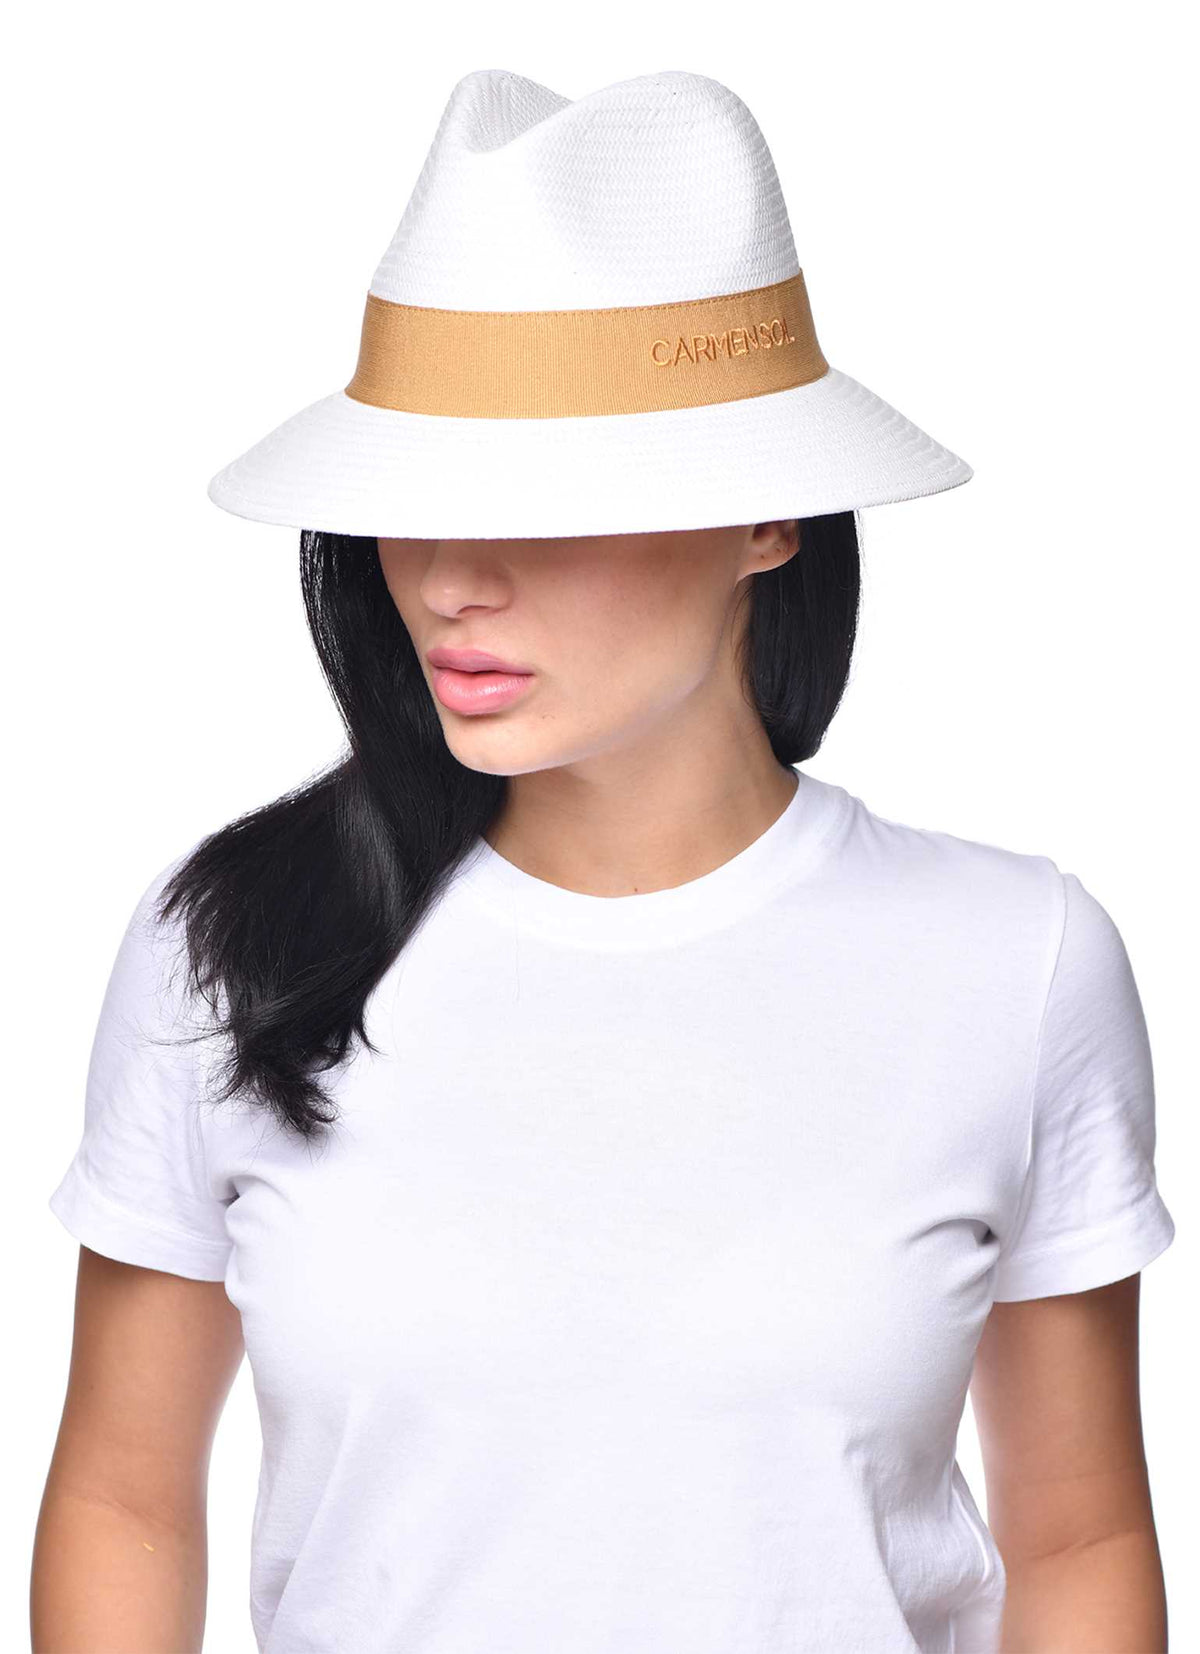 Women wearing Dolores 2 packable fedora hat in color nude